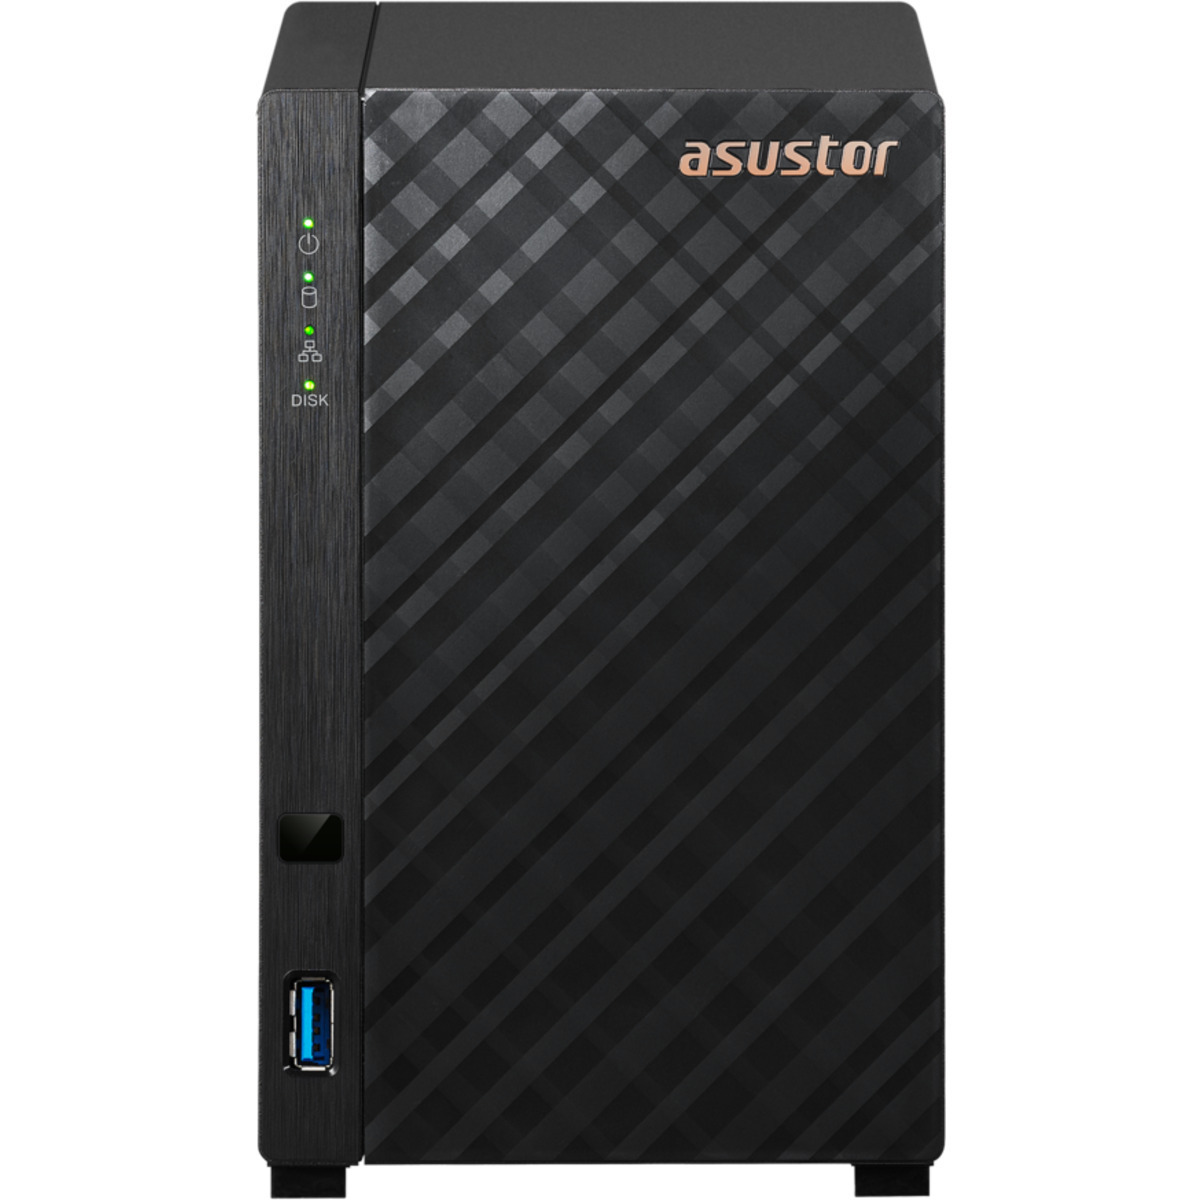 ASUSTOR DRIVESTOR 2 Lite AS1102TL 24tb 2-Bay Desktop Personal / Basic Home / Small Office NAS - Network Attached Storage Device 1x24tb Seagate IronWolf Pro ST24000NT002 3.5 7200rpm SATA 6Gb/s HDD NAS Class Drives Installed - Burn-In Tested DRIVESTOR 2 Lite AS1102TL